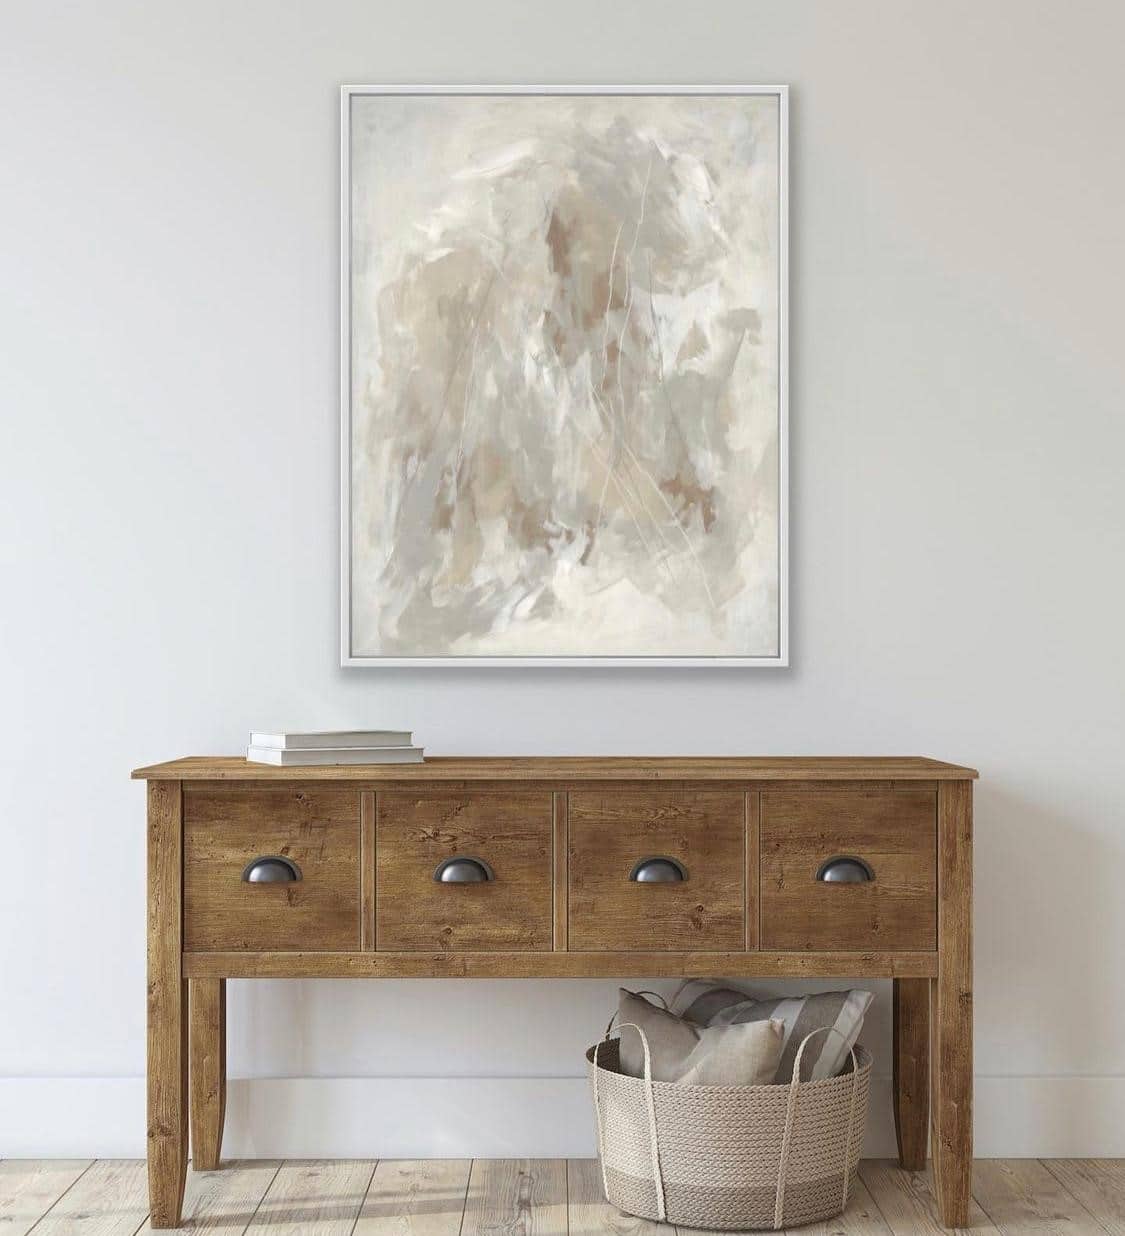 How to choose the right size artwork for your space